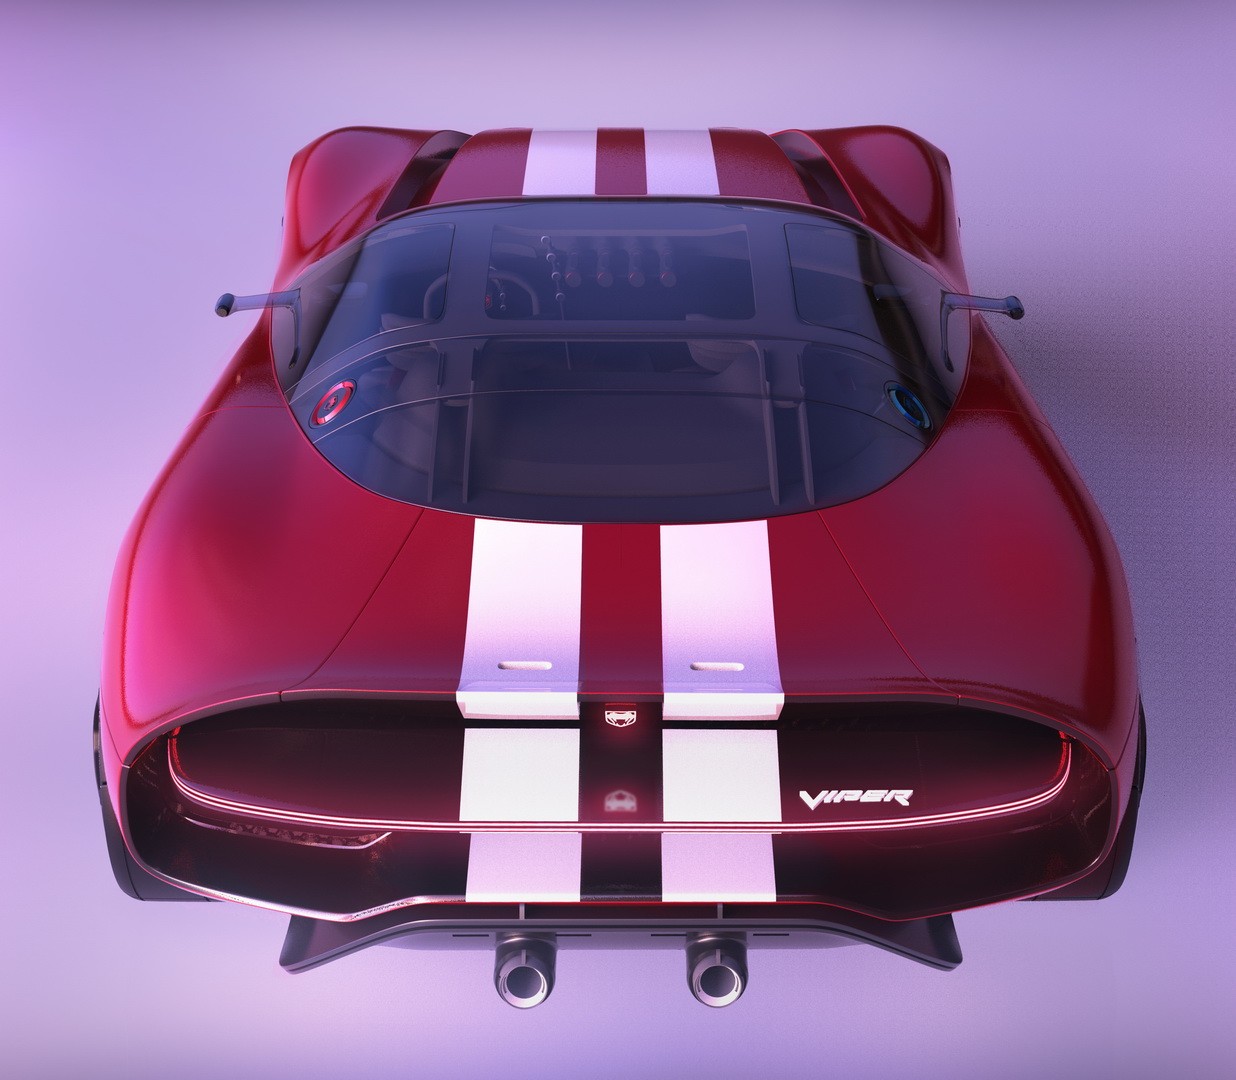 Next Gen Dodge Viper Looks Like The Ultimate Supercar In Stunning New